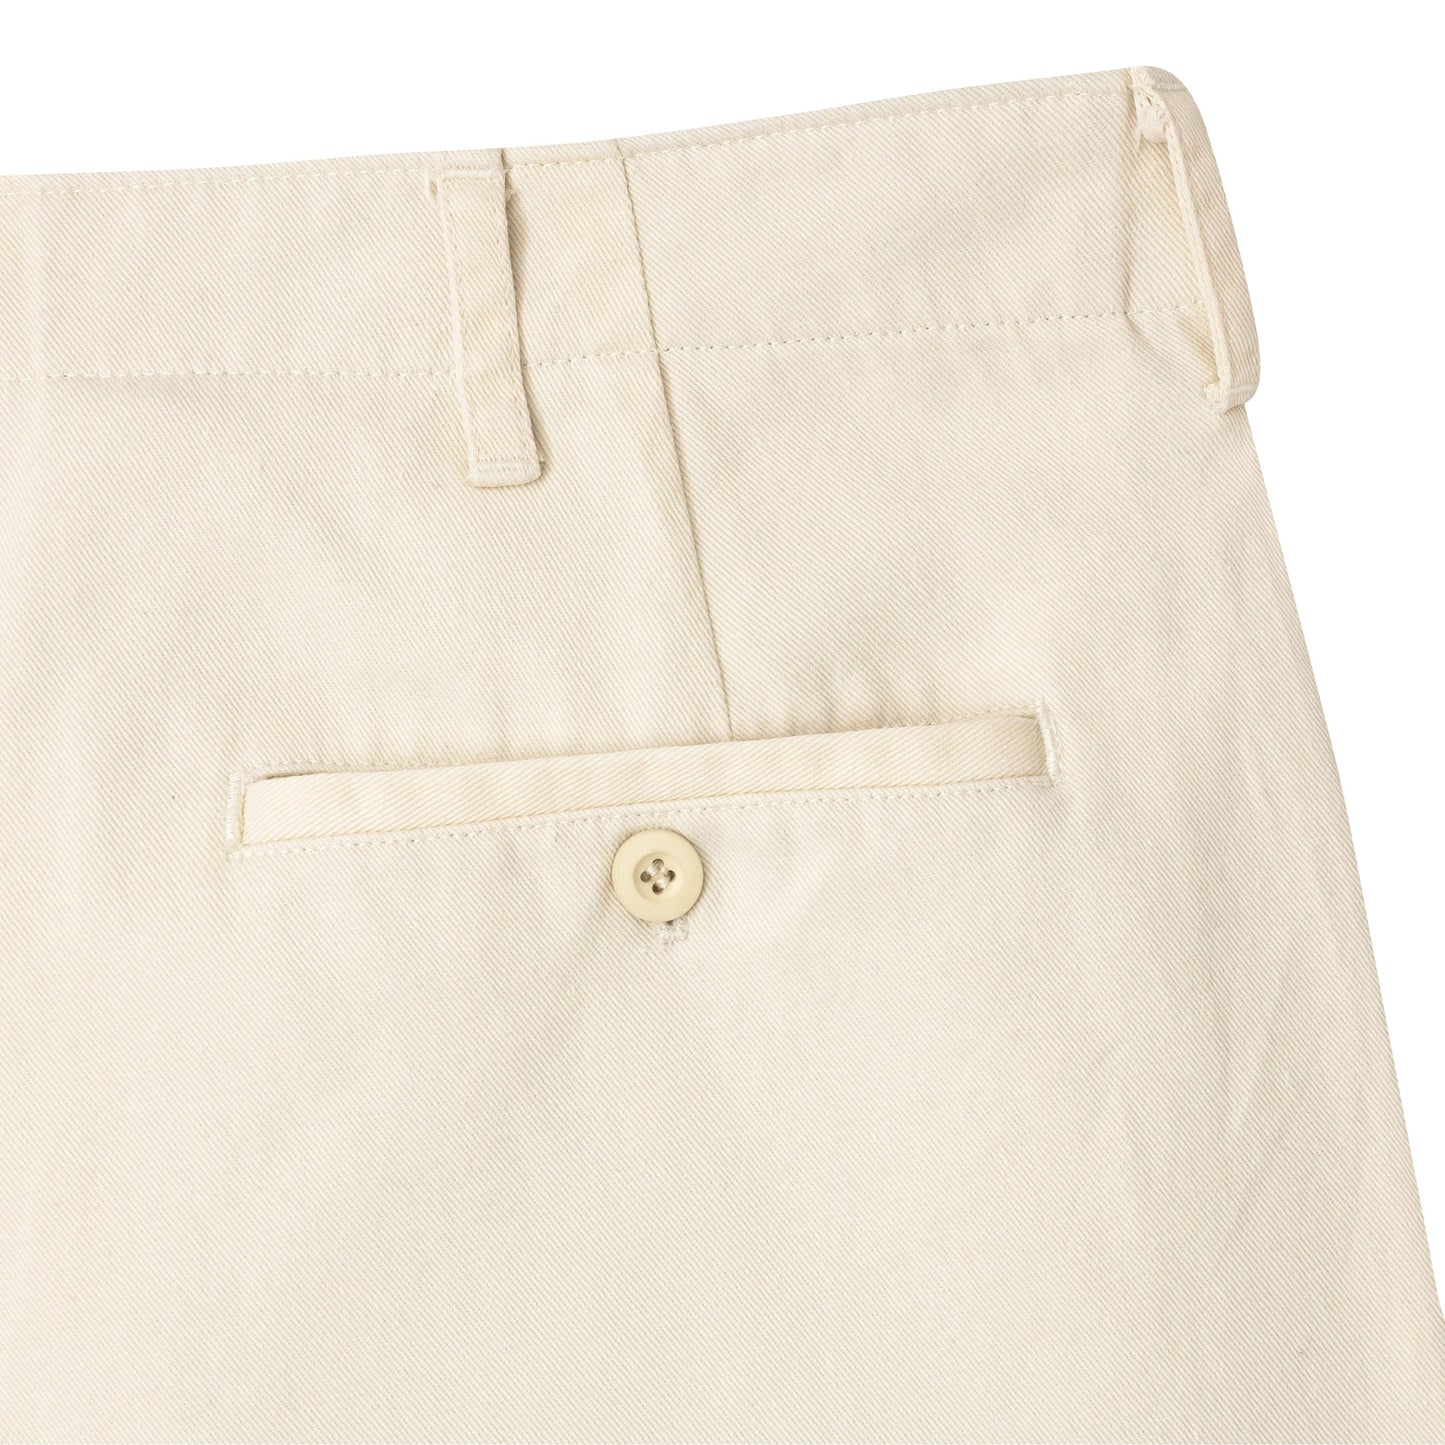 Cotton Twill trousers (Ivy Wide Leg Cotton Trousers)